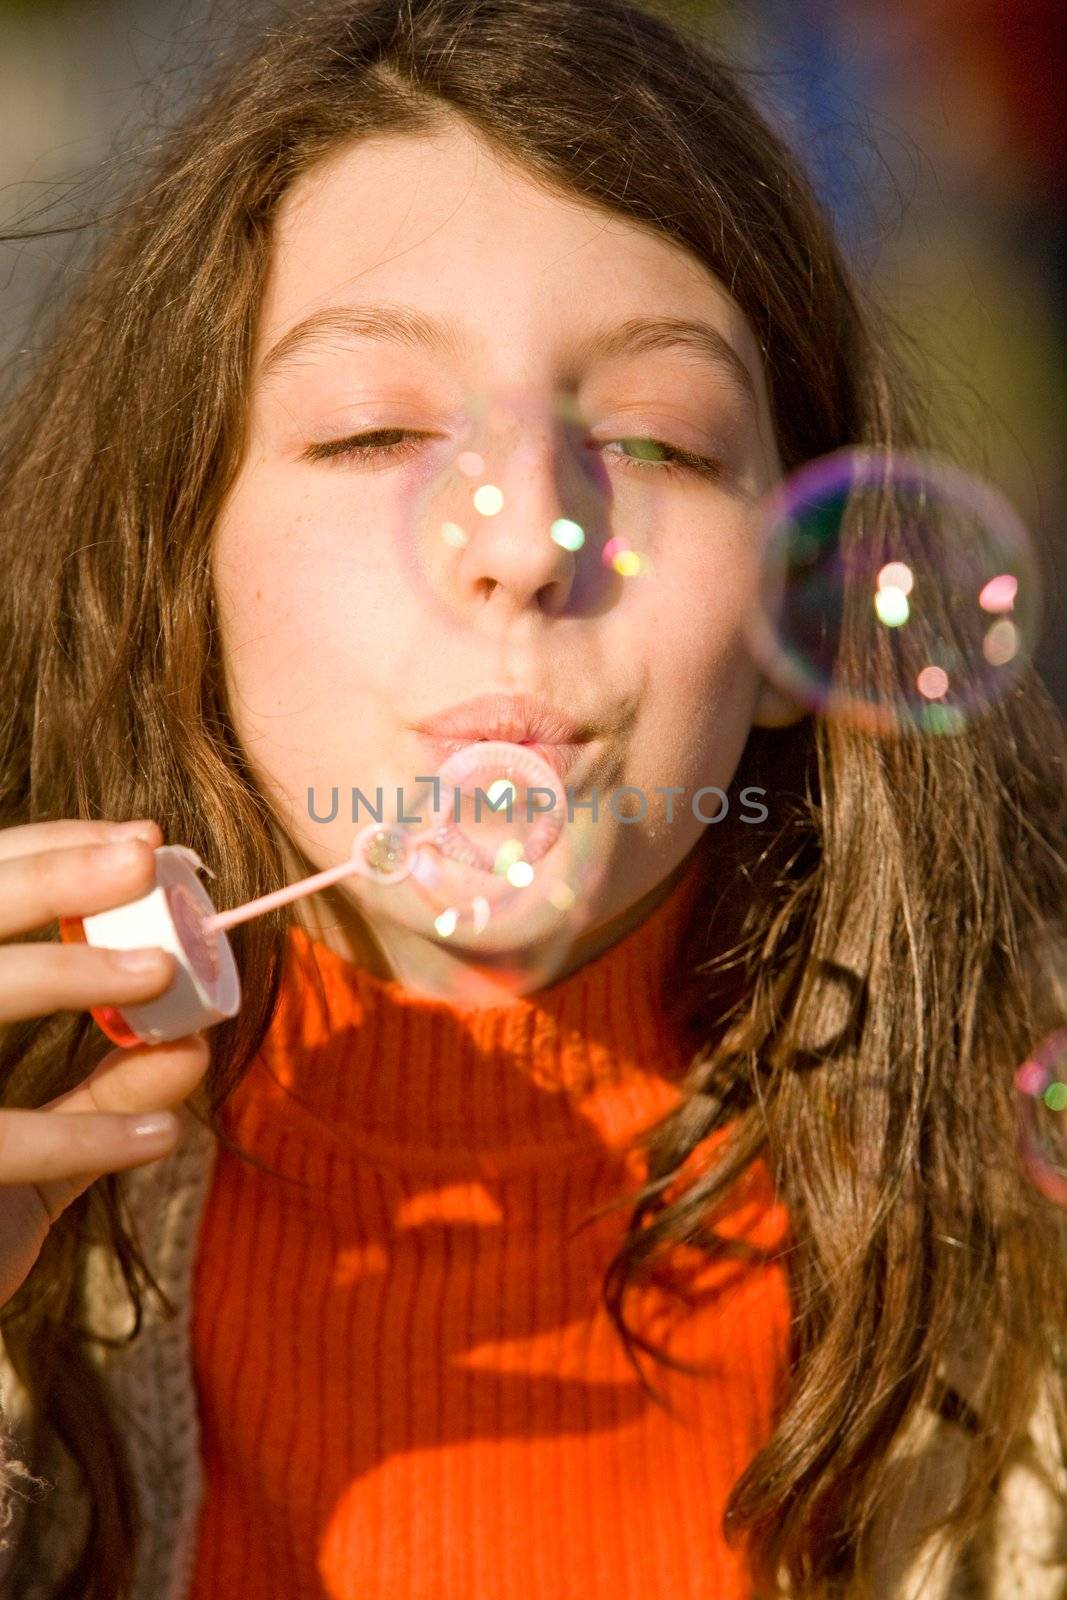 The young girl inflates soap bubbles
